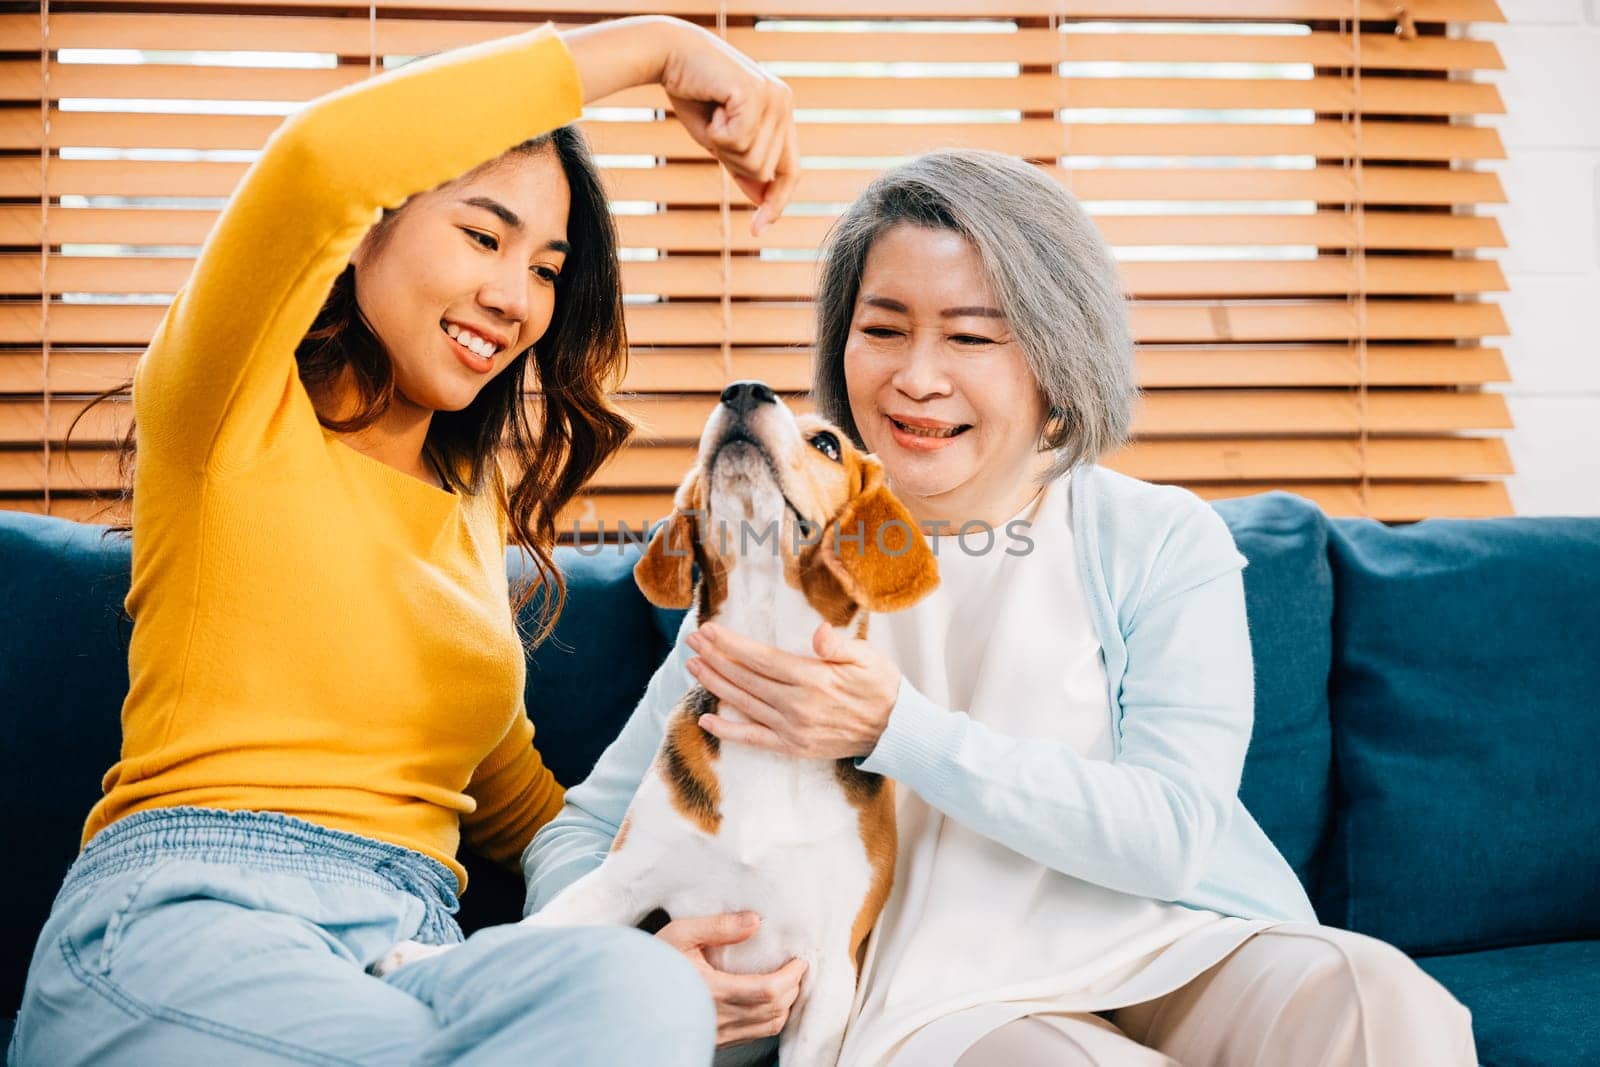 In a cozy home setting, a woman, her mother, and their Beagle dog capture a heartwarming family portrait on the sofa. Their happiness and togetherness shine through. Pet love. by Sorapop